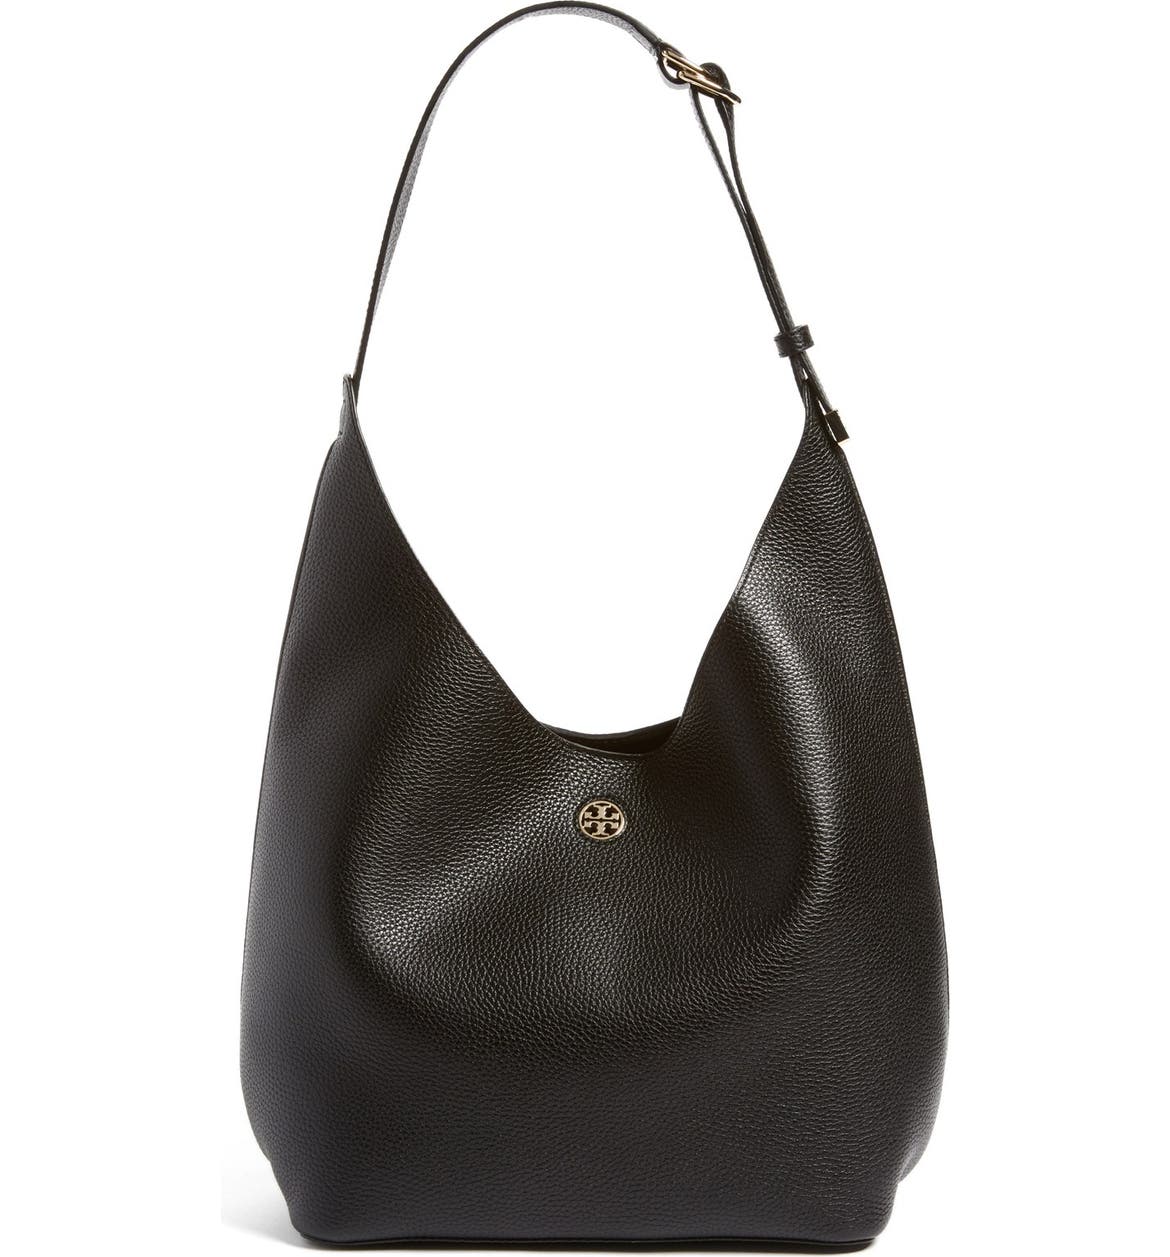 Tory Burch 'Perry' Leather Hobo | Nordstrom